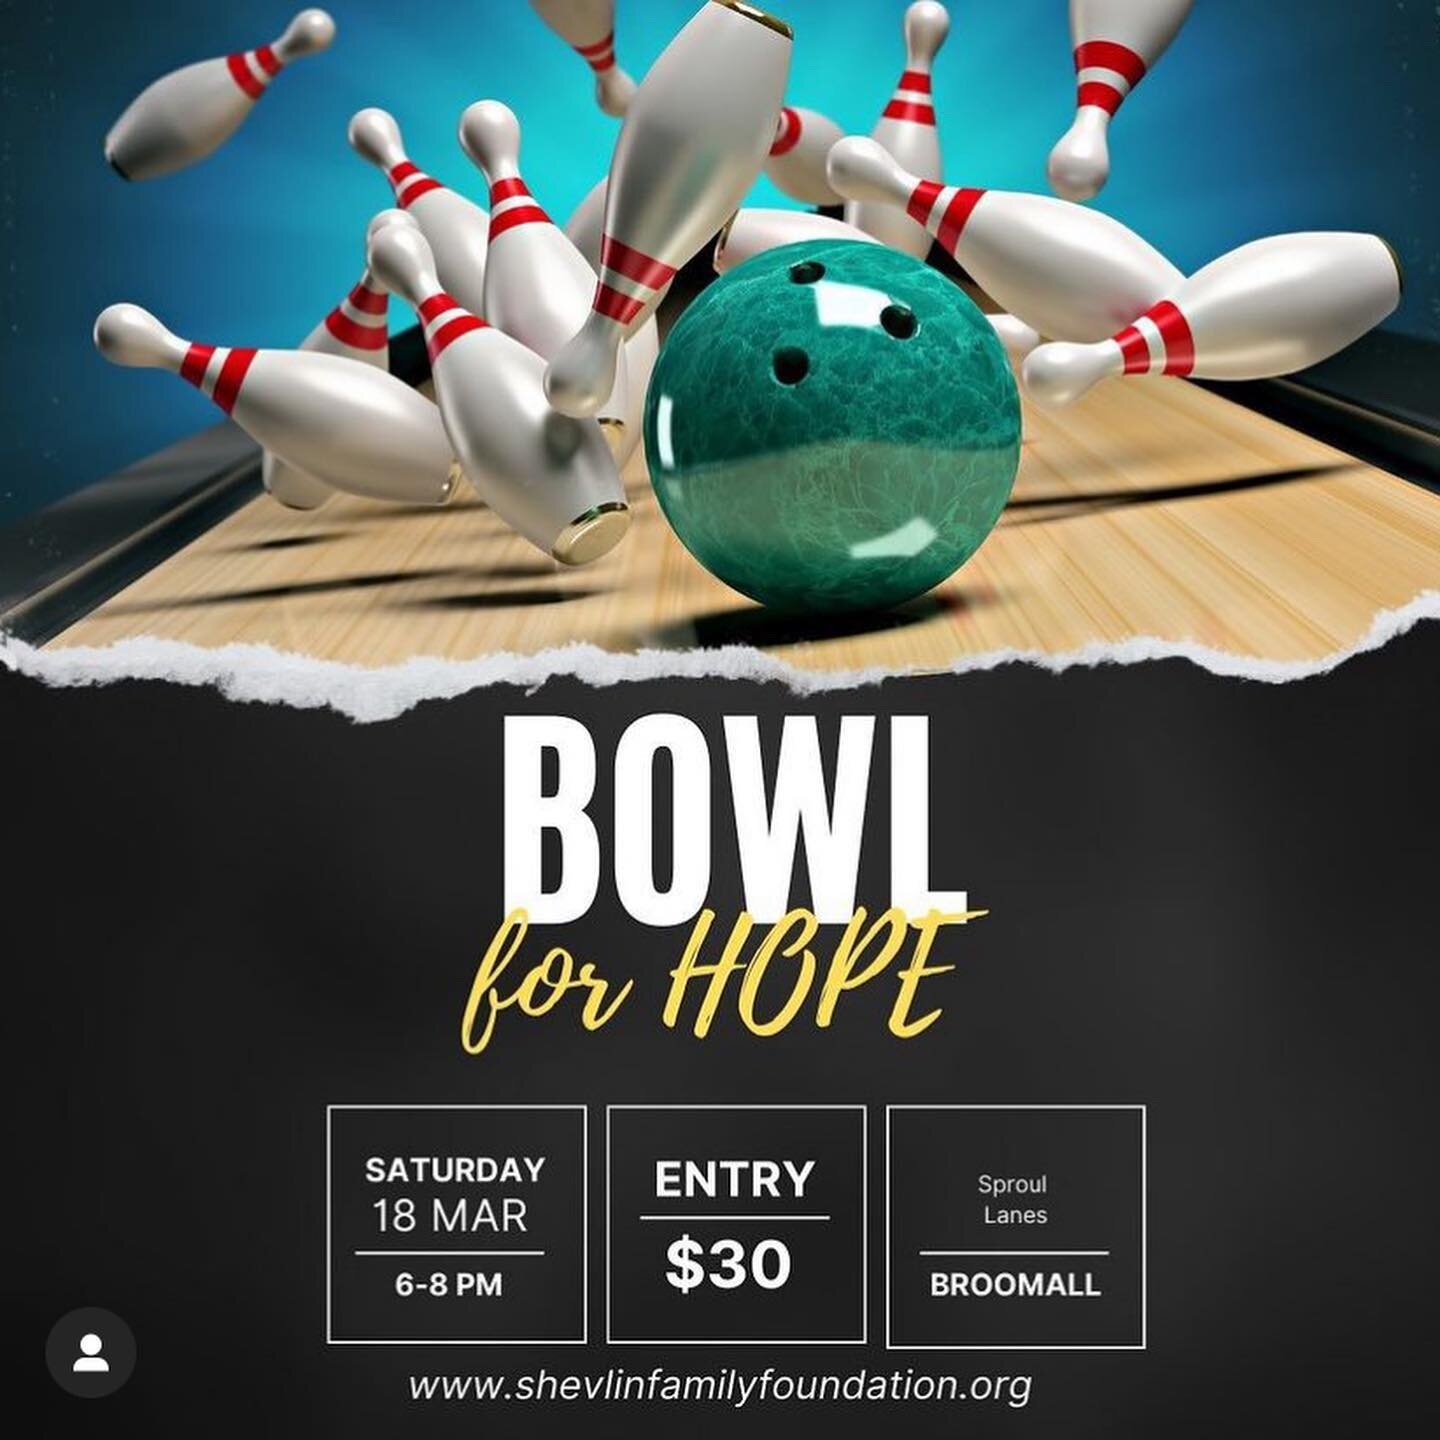 #Repost from the @shevfamilyfoundation Join us for the Bowl for Hope event! Reserve your lane by clicking the link below ⬇️ 
We hope to see you all to join us for some fun at Sproul Lanes 🎳❤️

https://shevlinfamilyfoundation.org/bowl-for-hope-1?fbcl